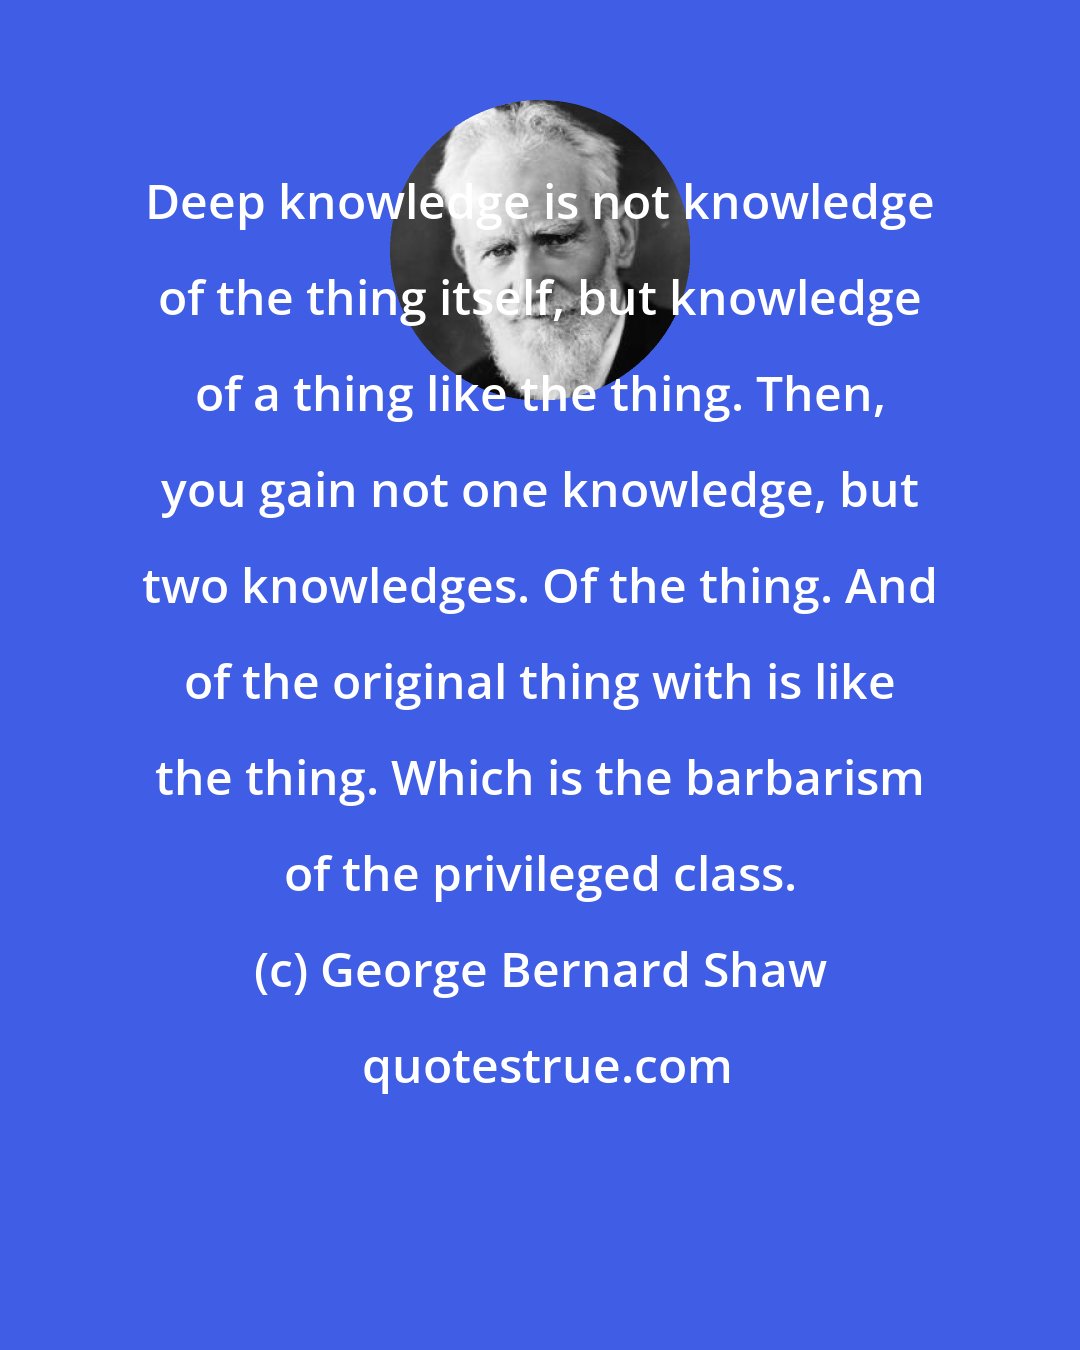 George Bernard Shaw: Deep knowledge is not knowledge of the thing itself, but knowledge of a thing like the thing. Then, you gain not one knowledge, but two knowledges. Of the thing. And of the original thing with is like the thing. Which is the barbarism of the privileged class.